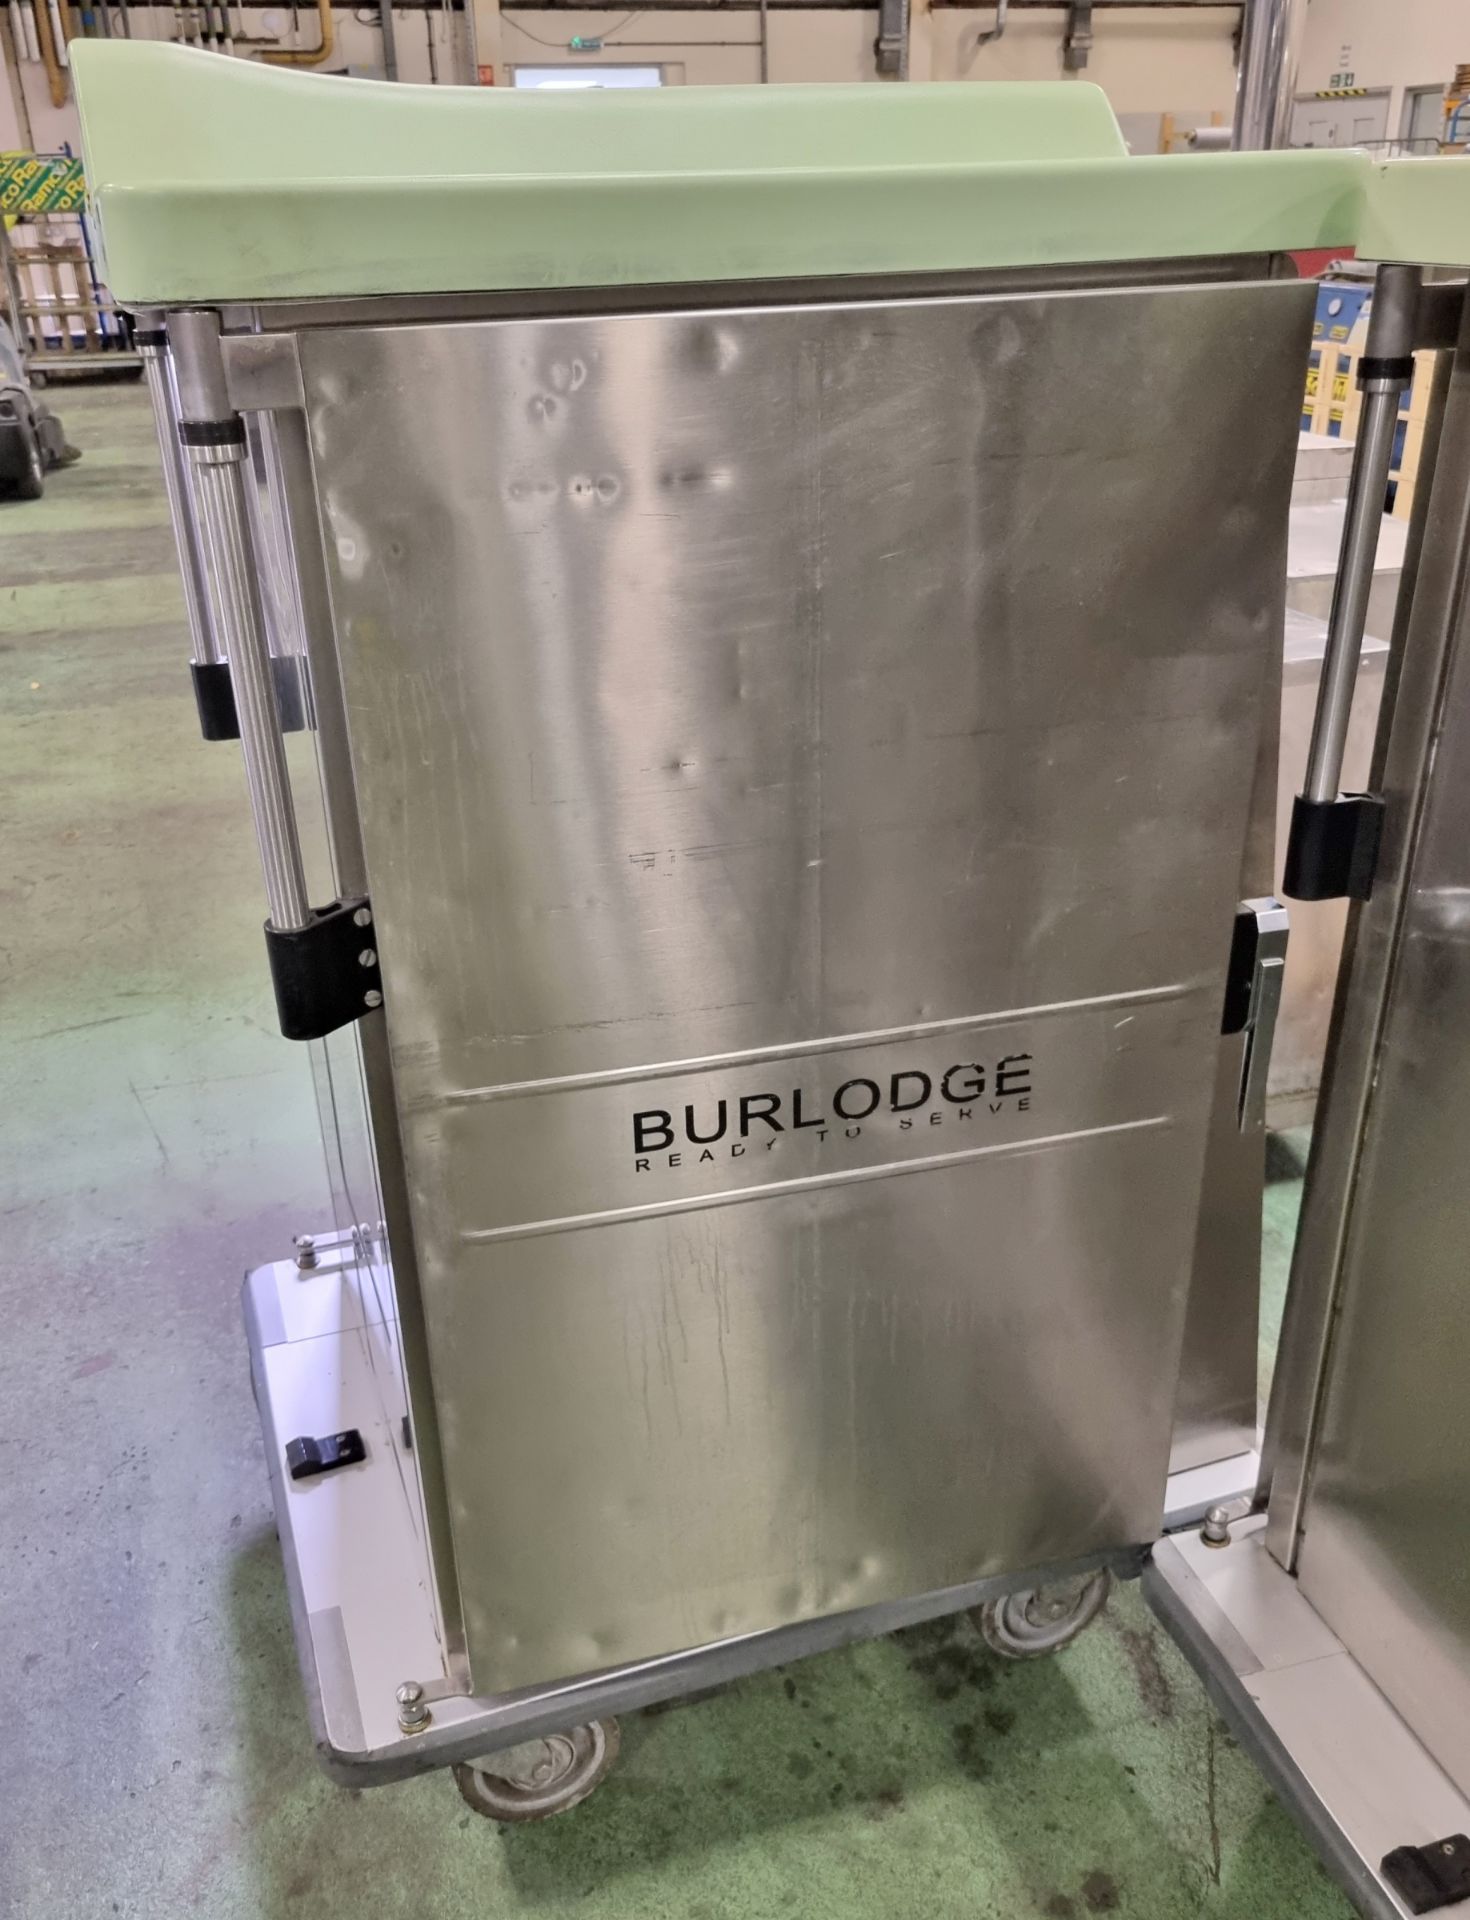 Burlodge RTS hot and cold tray delivery trolley - opens boths sides - W 800 x D 1100 x H 1500mm - Bild 6 aus 7